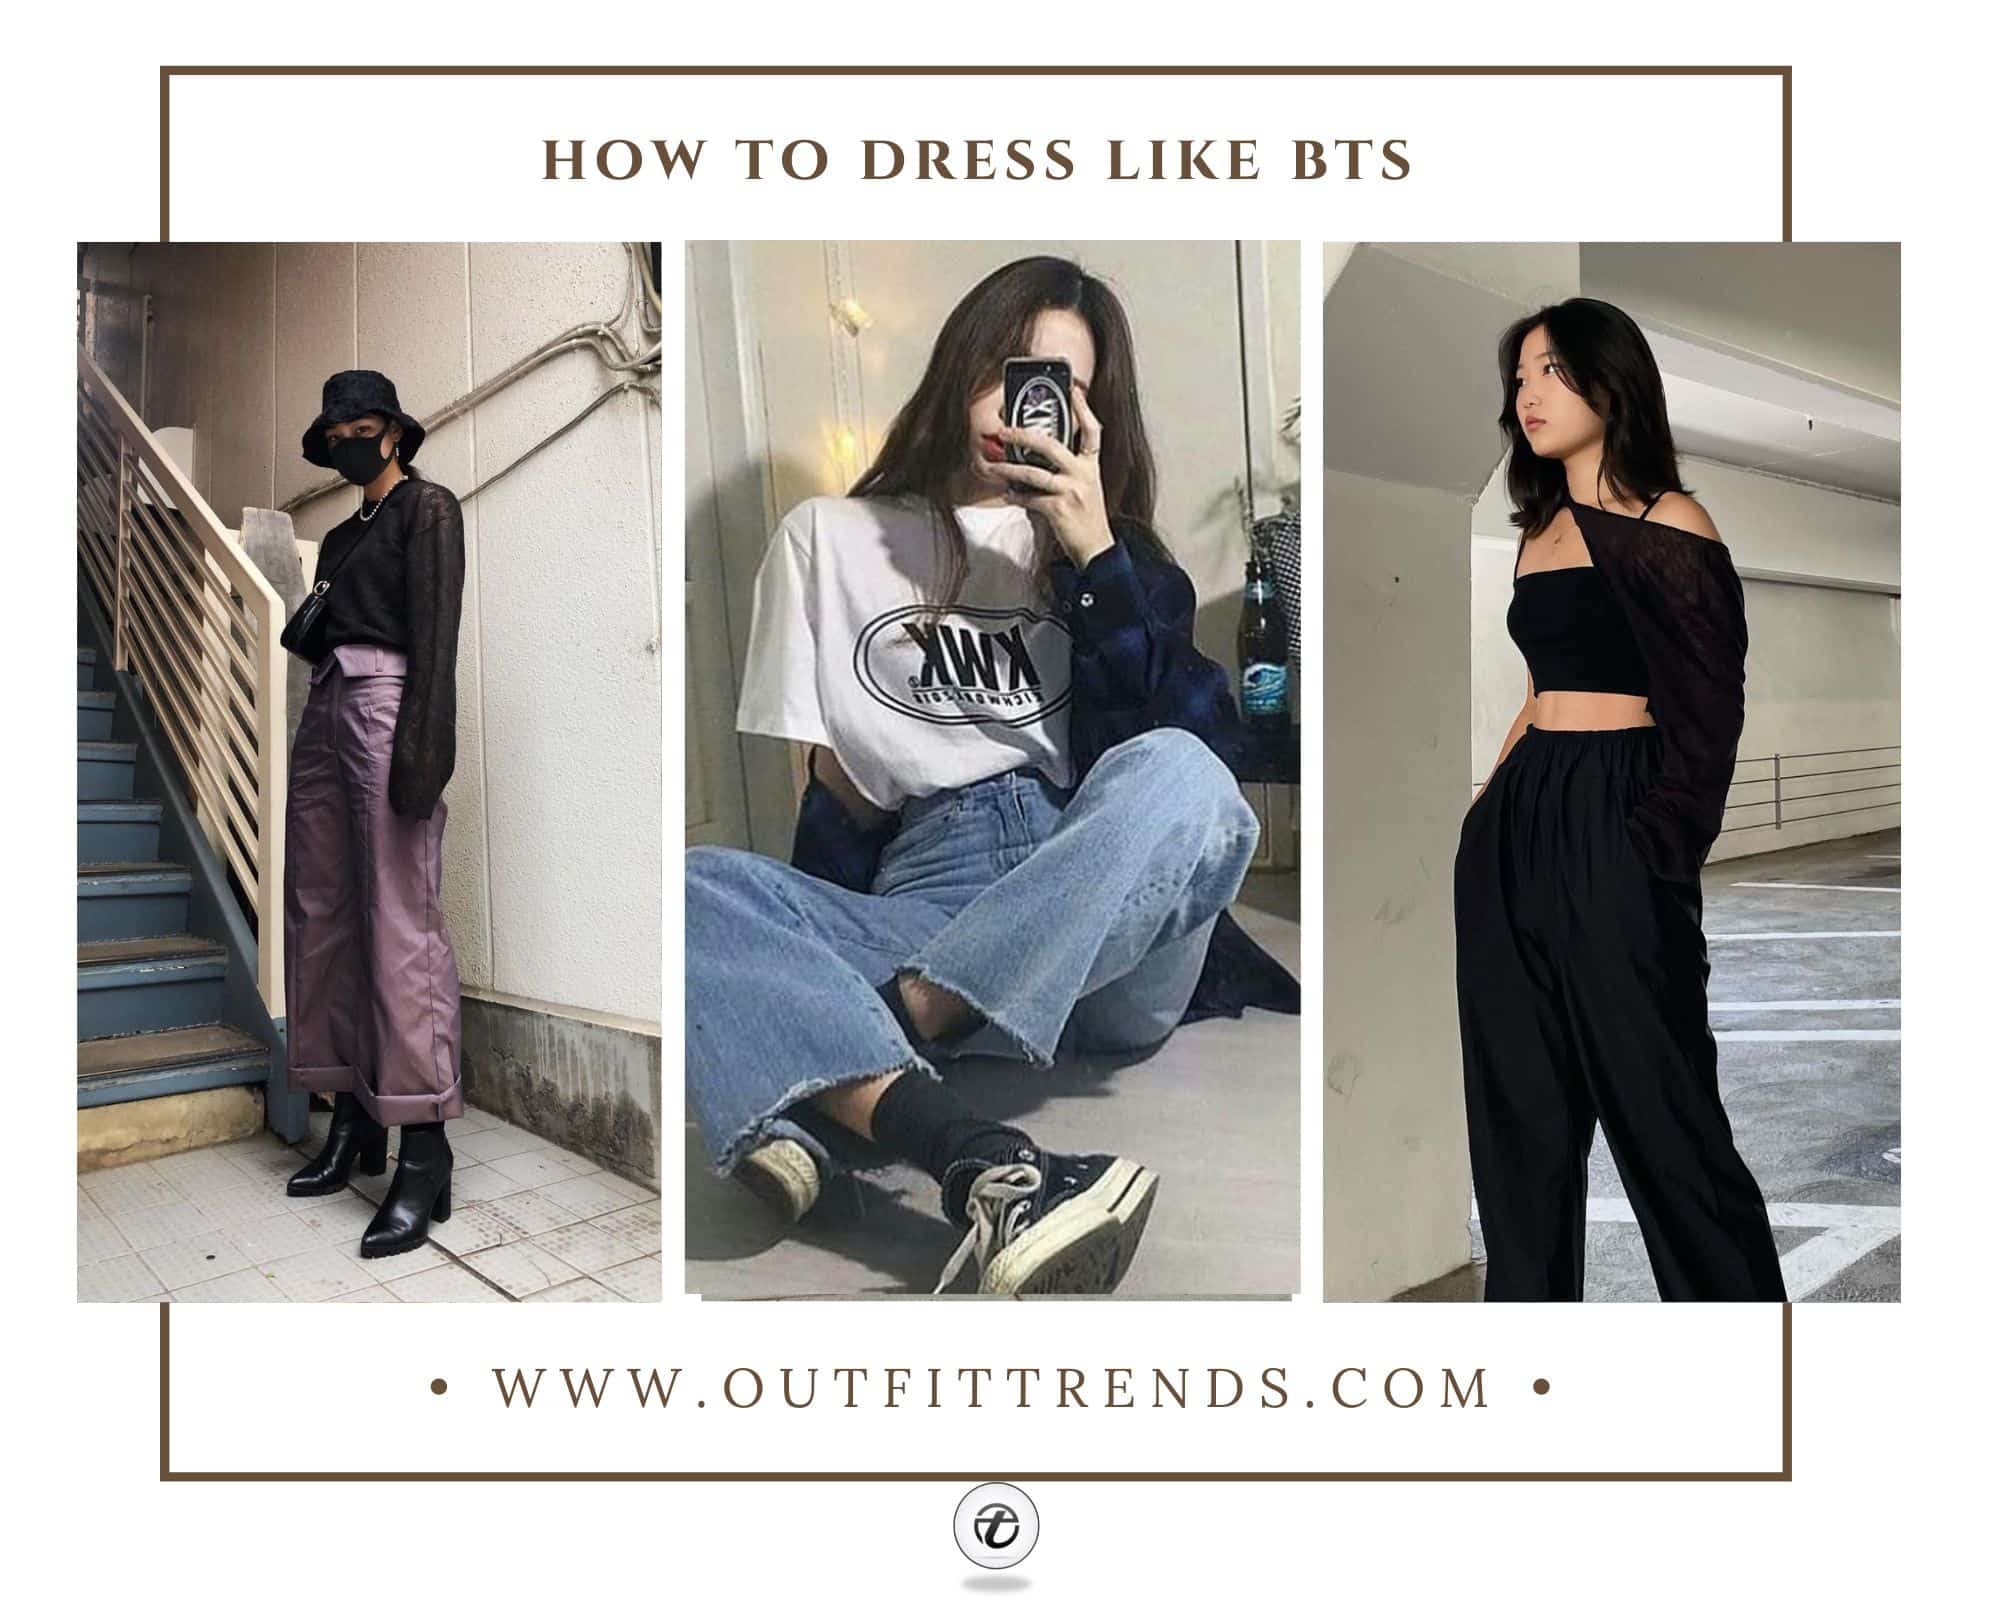 10 Easy Ways To Dress Like BTS's Jungkook